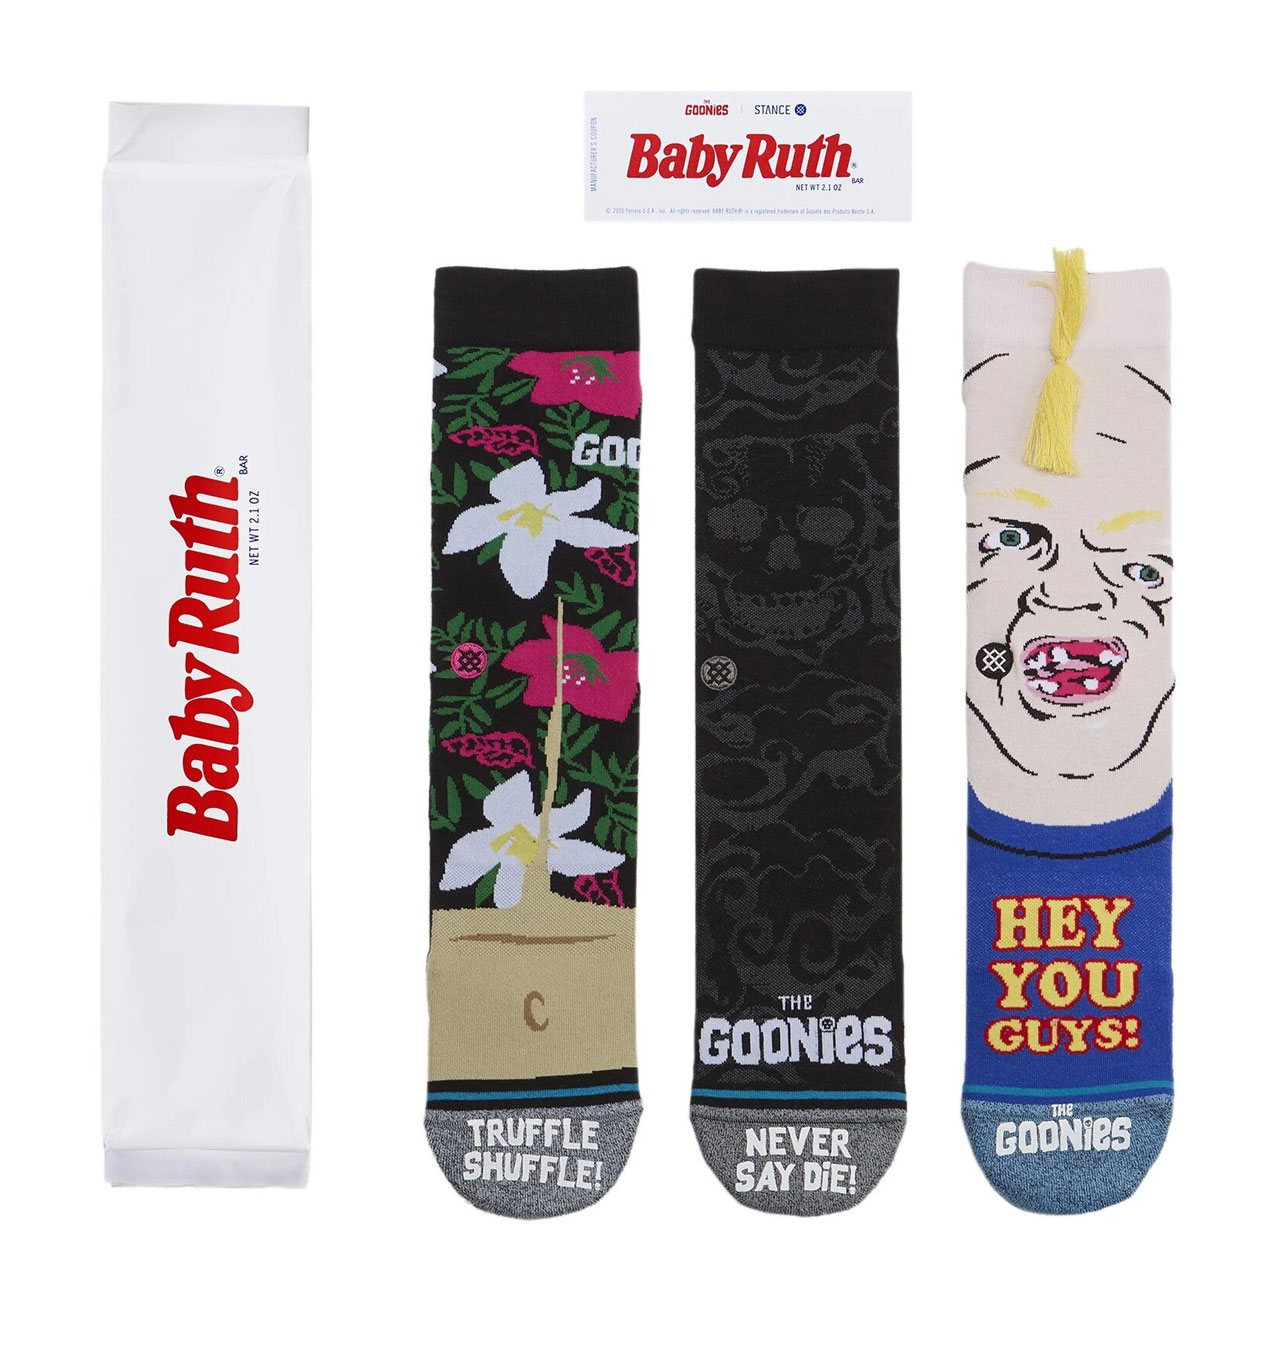 Stance - Goonies Select Baby Ruth Box